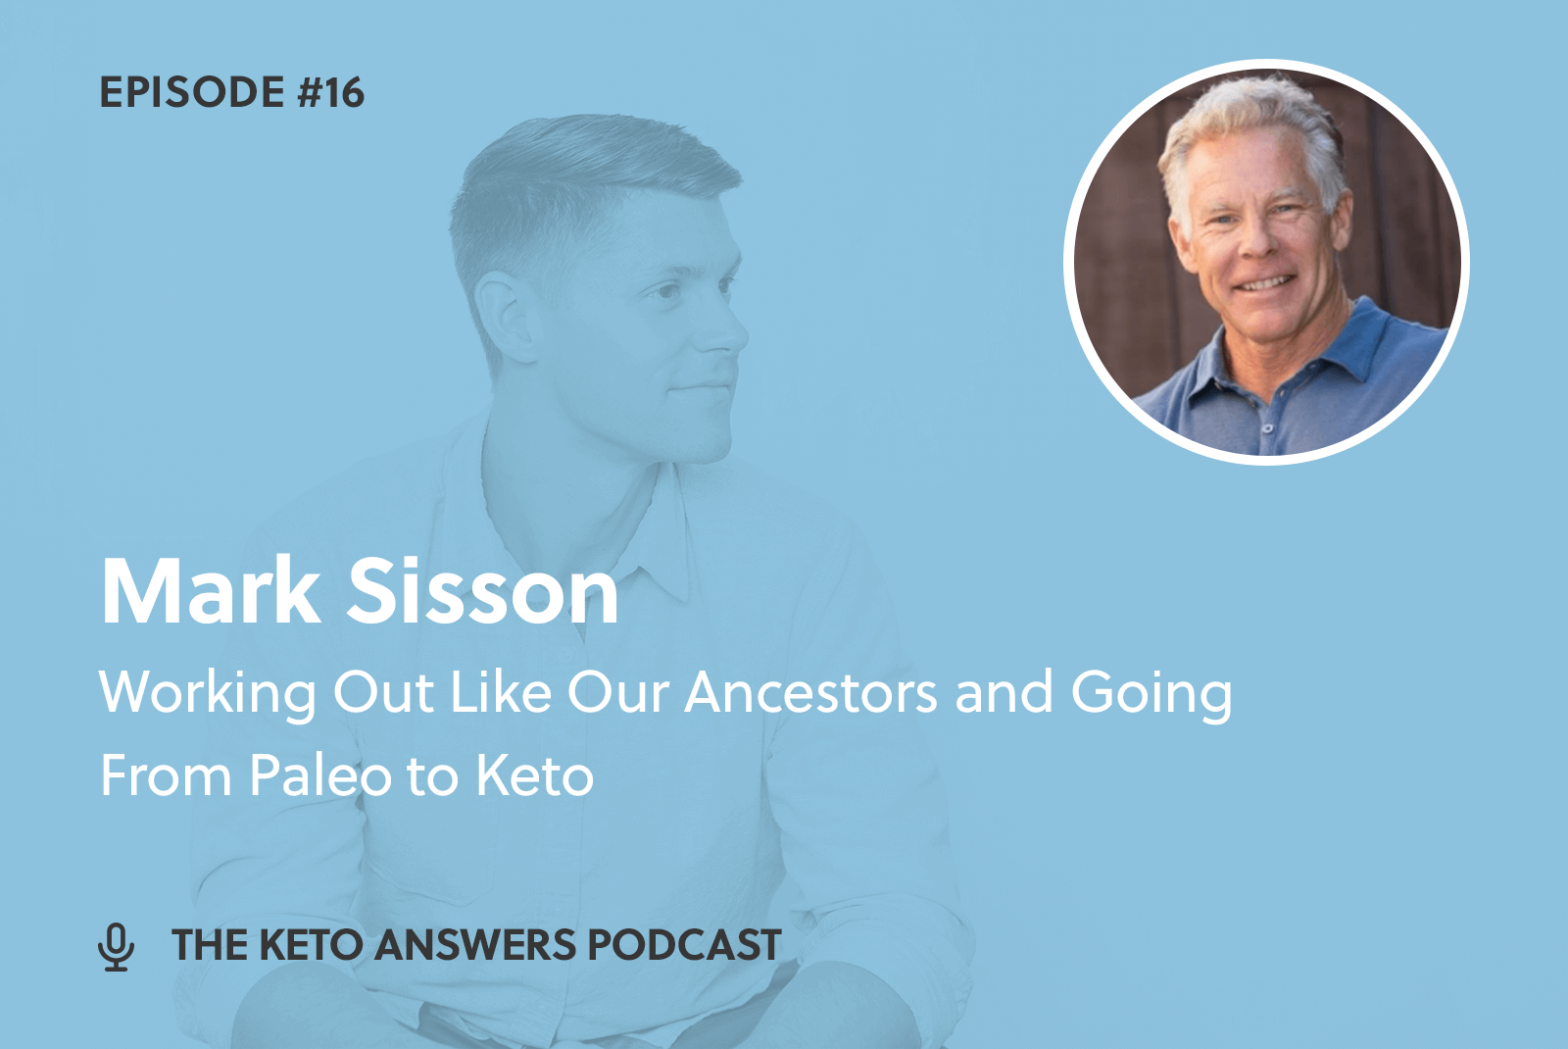 016: Working Out Like Our Ancestors and Going From Paleo to Keto - Mark Sisson